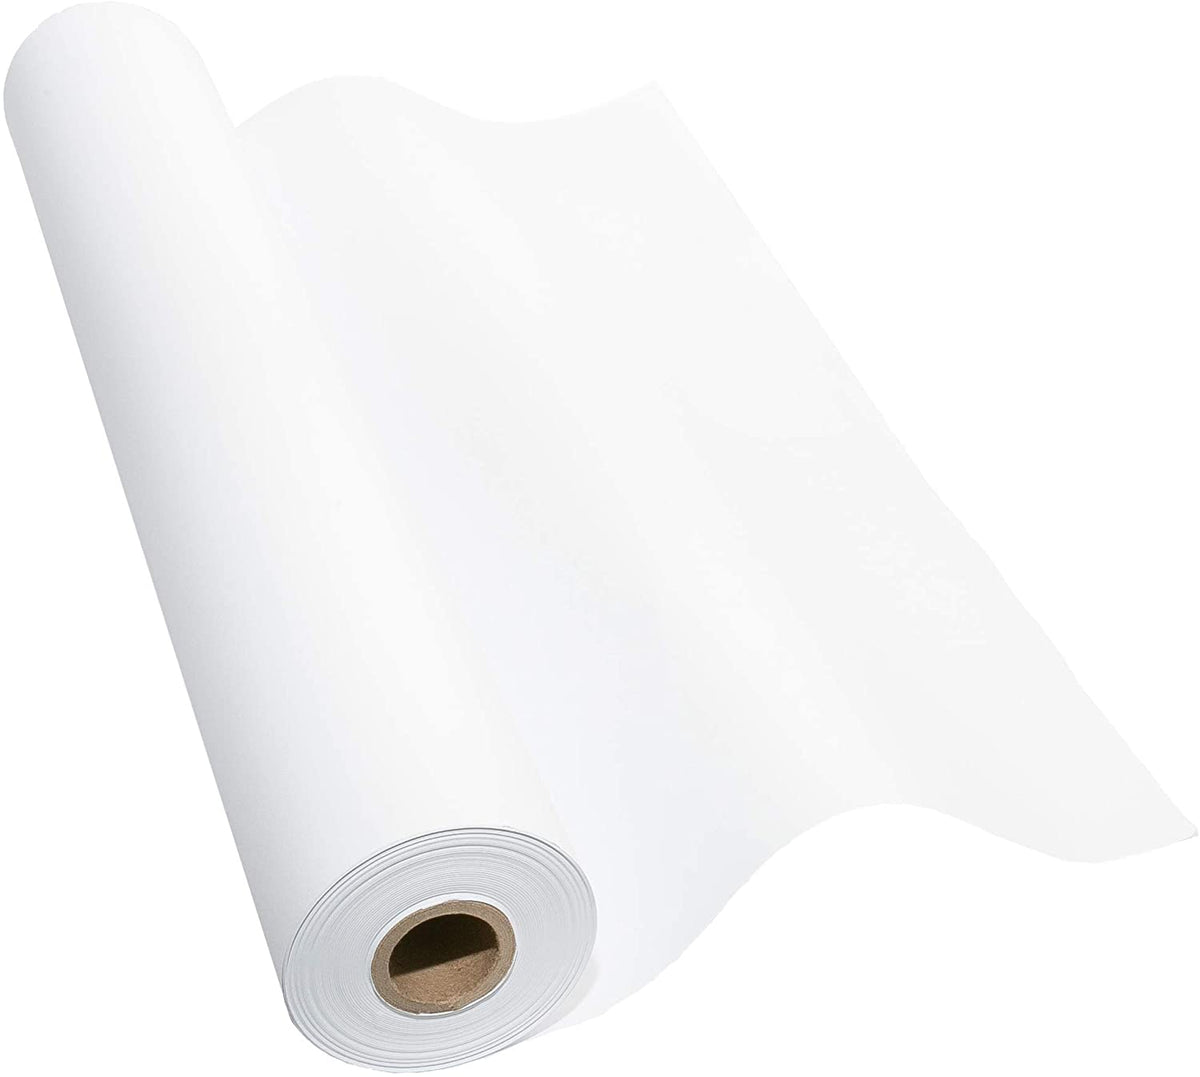 1 unit, 1 pack per unit. Boxed 30lb 100% Recycled Kraft Paper Roll24x1200 